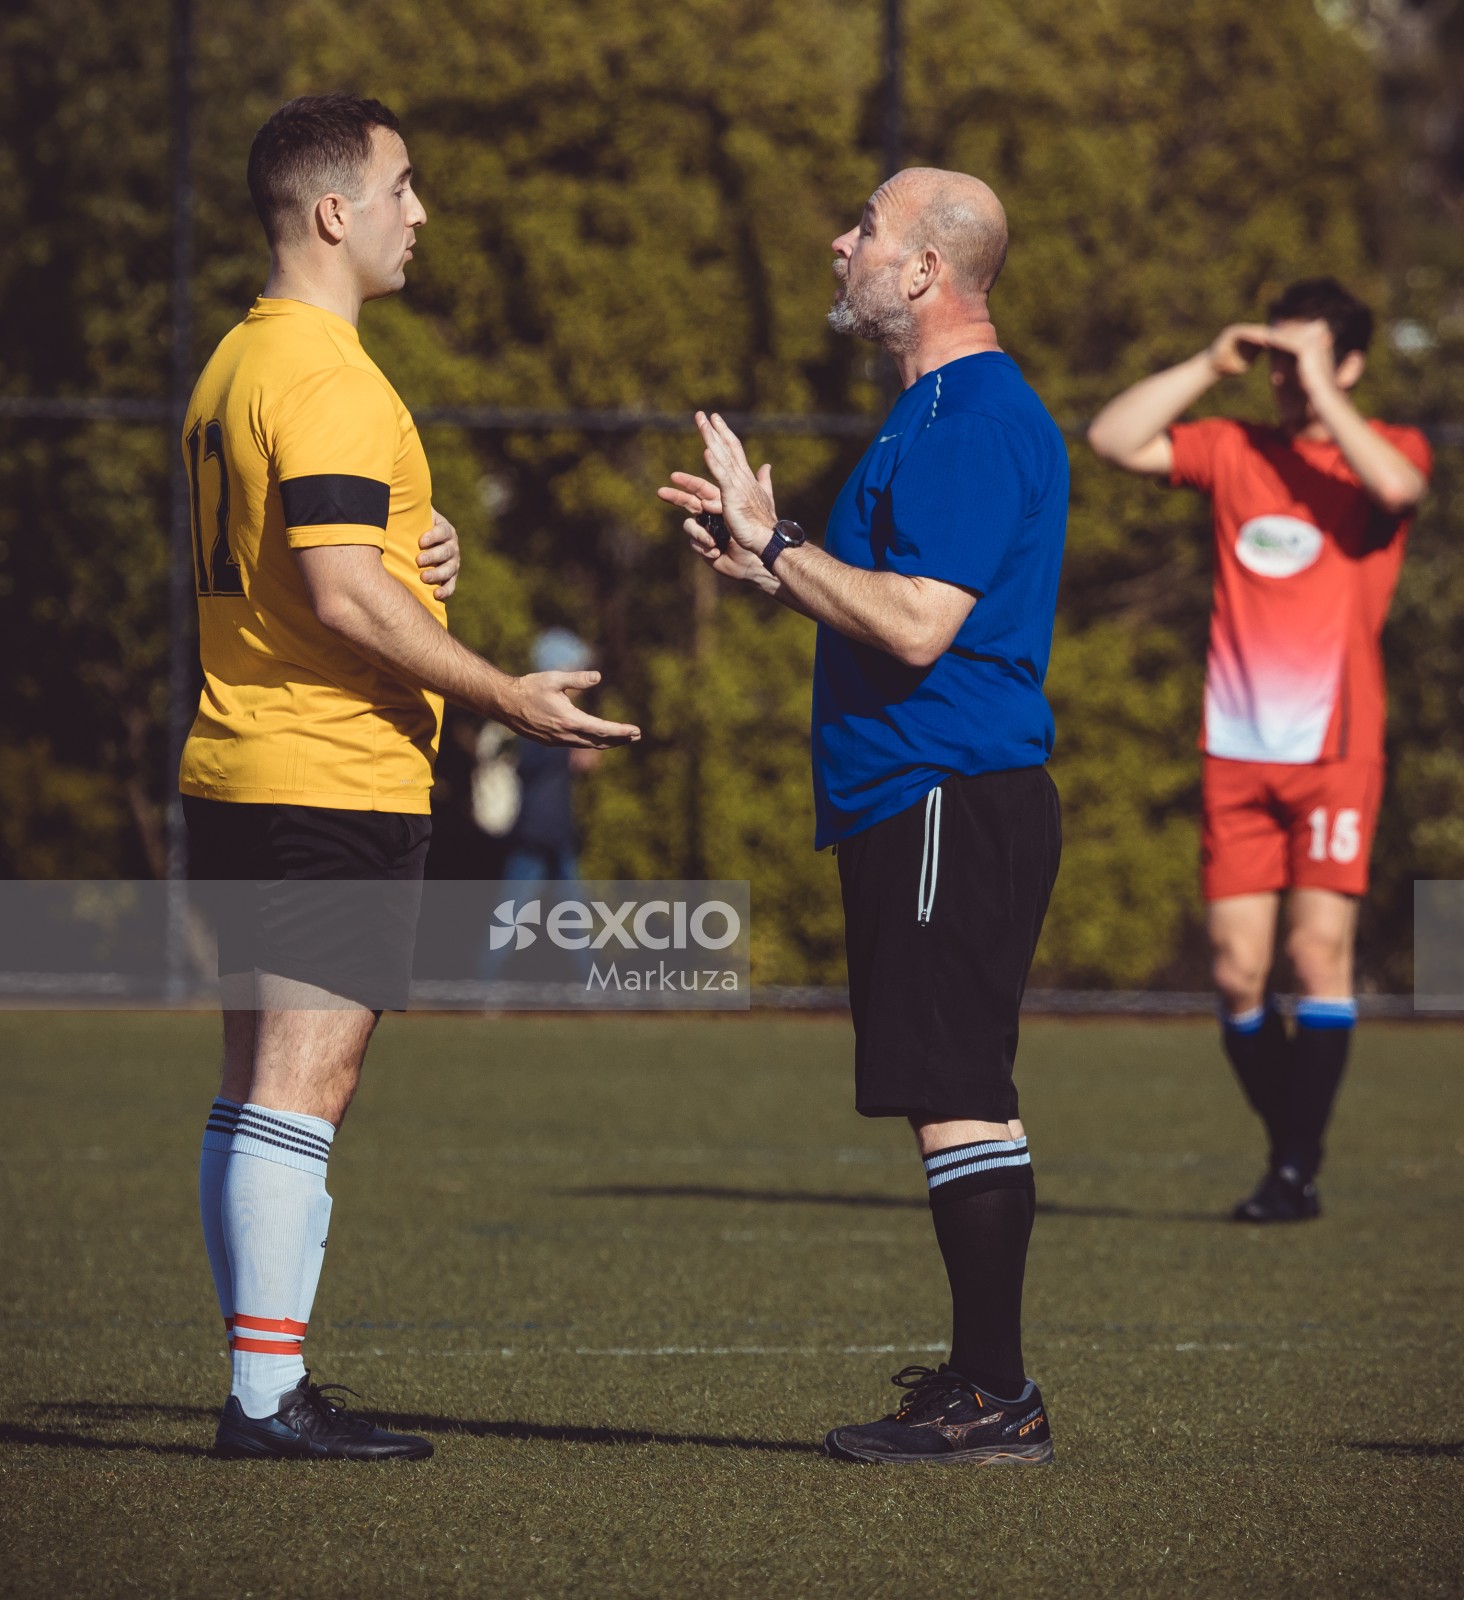 Referee talking to football player during match - Sports Zone sunday league